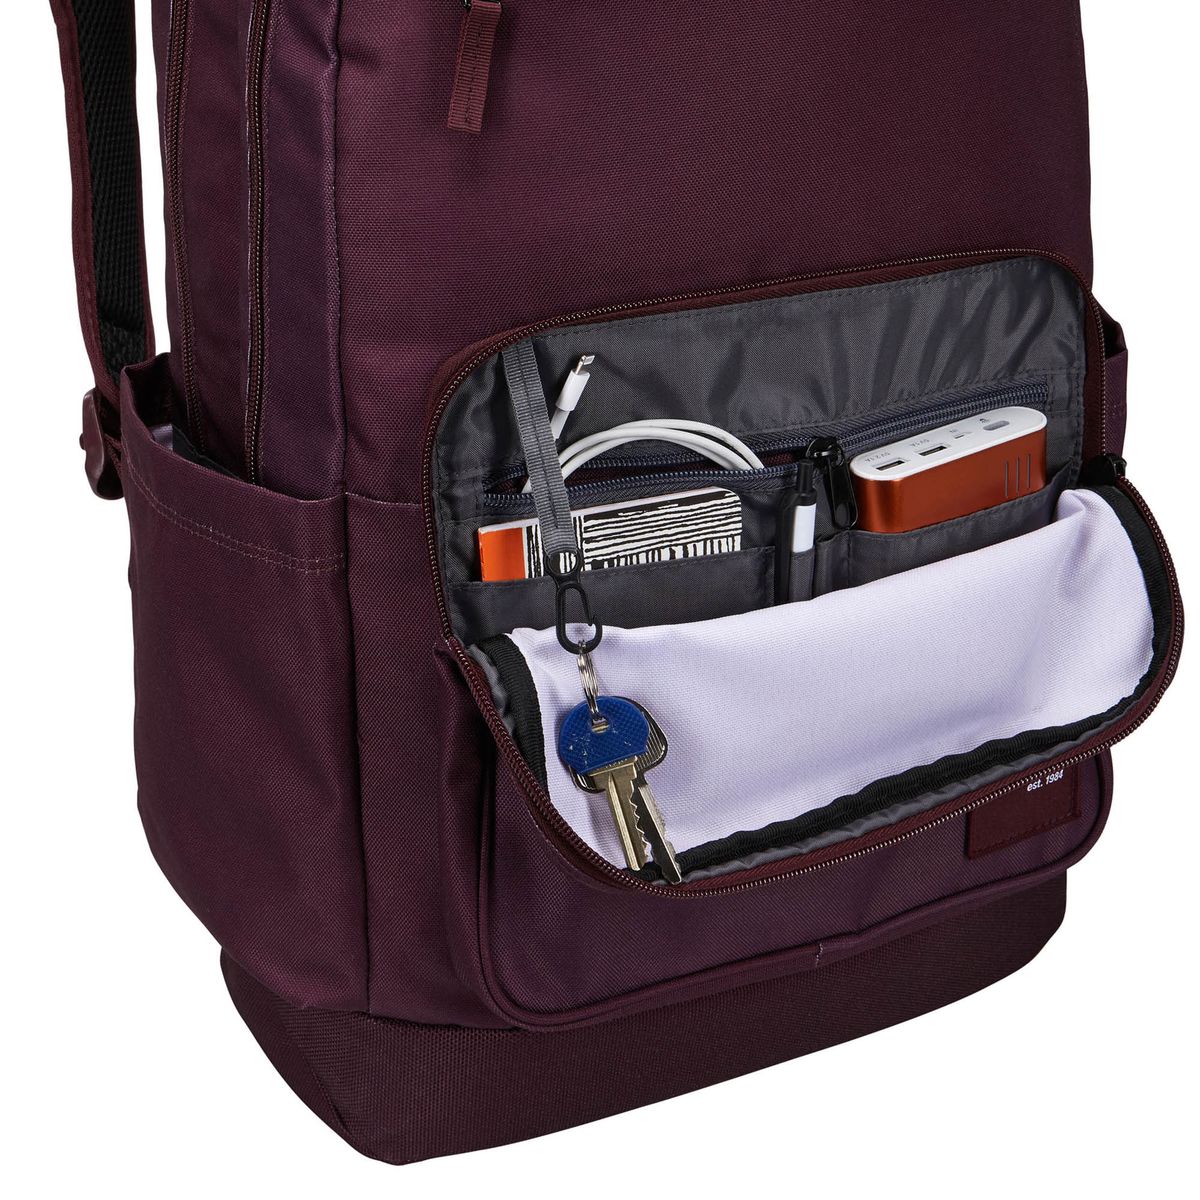 Case Logic Query Backpack